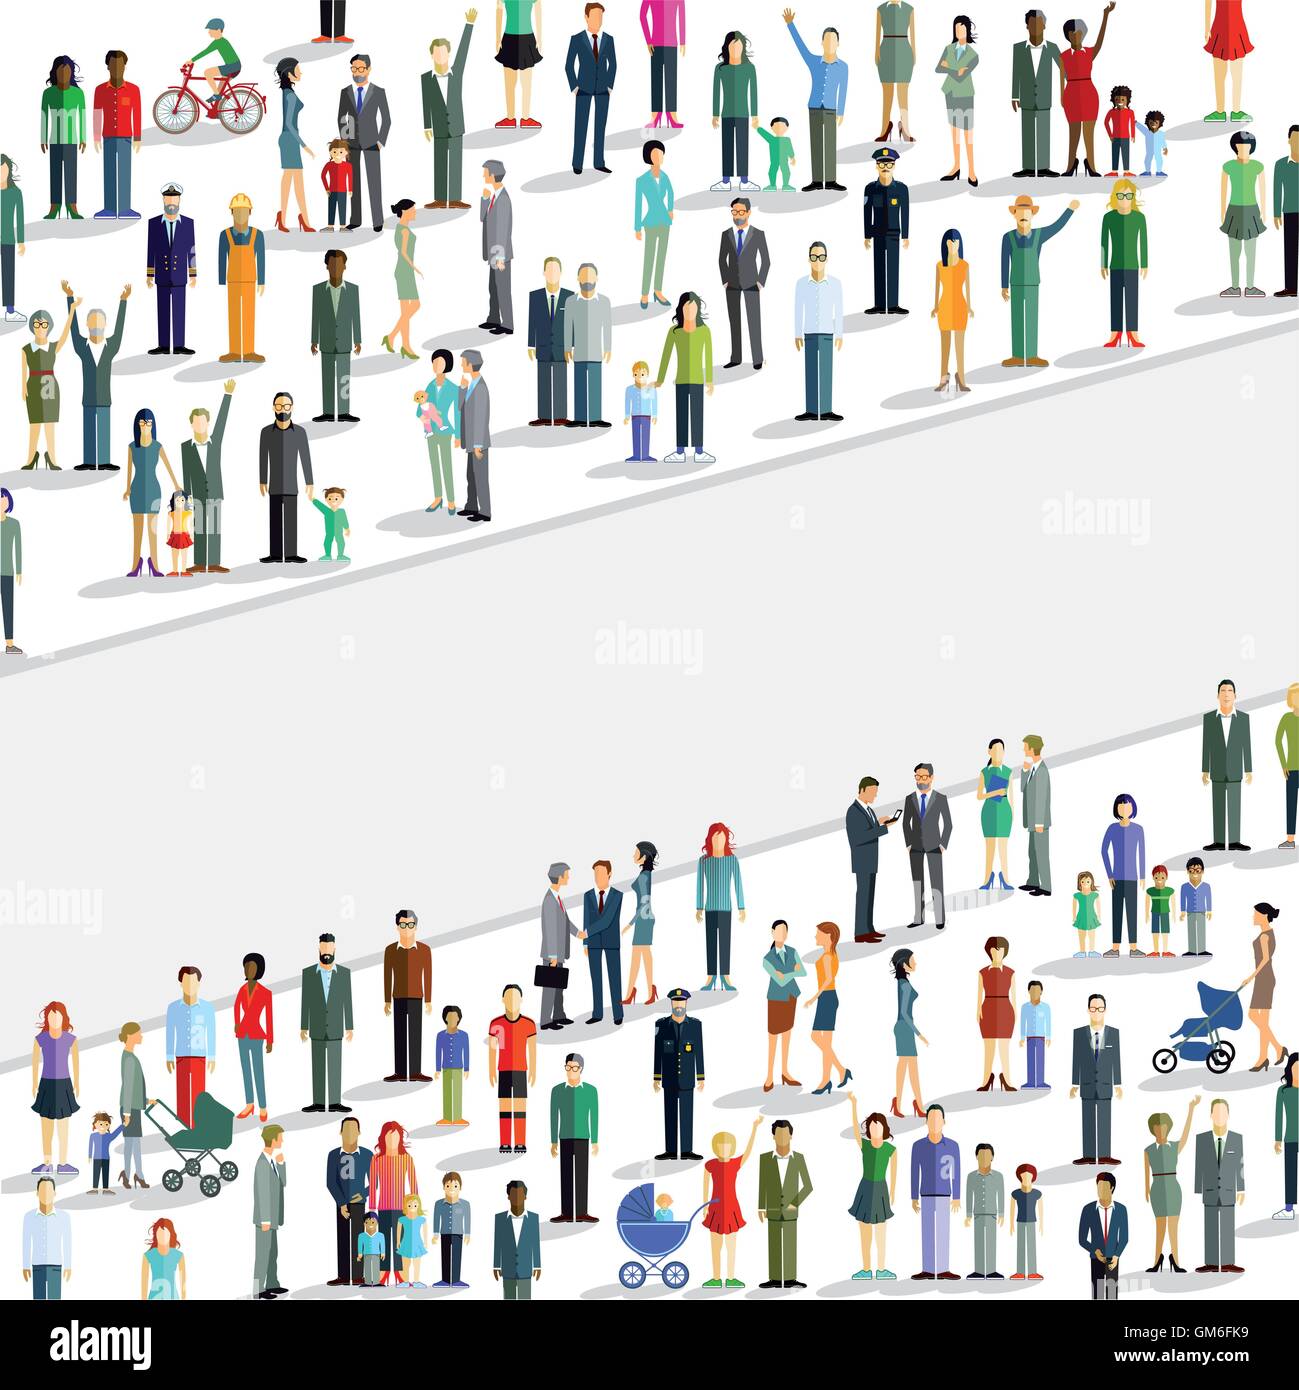 Large Crowd Stock Vector